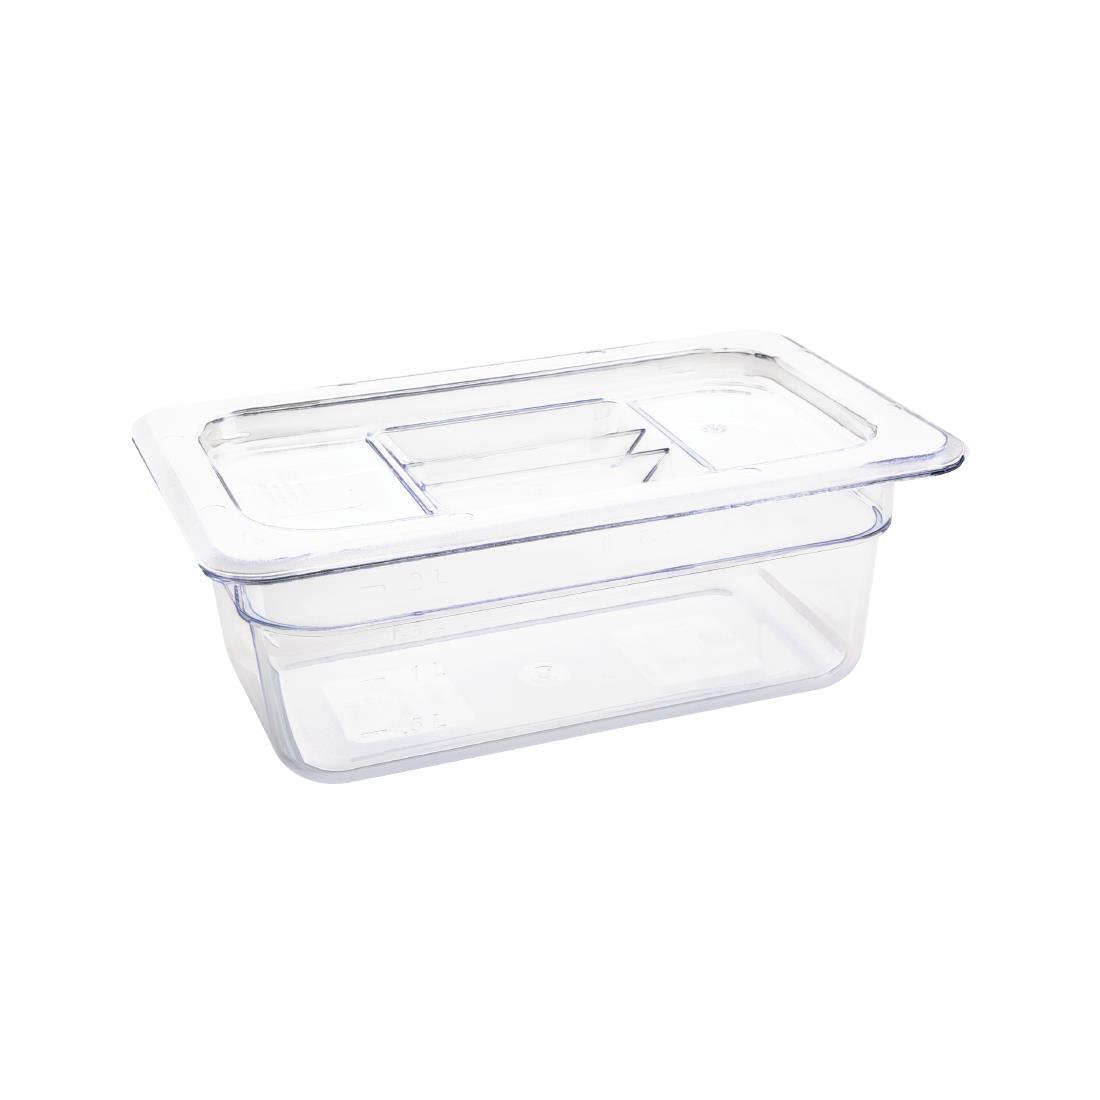 Vogue Polycarbonate 1/4 Gastronorm Container 100mm Clear - U237  - 2